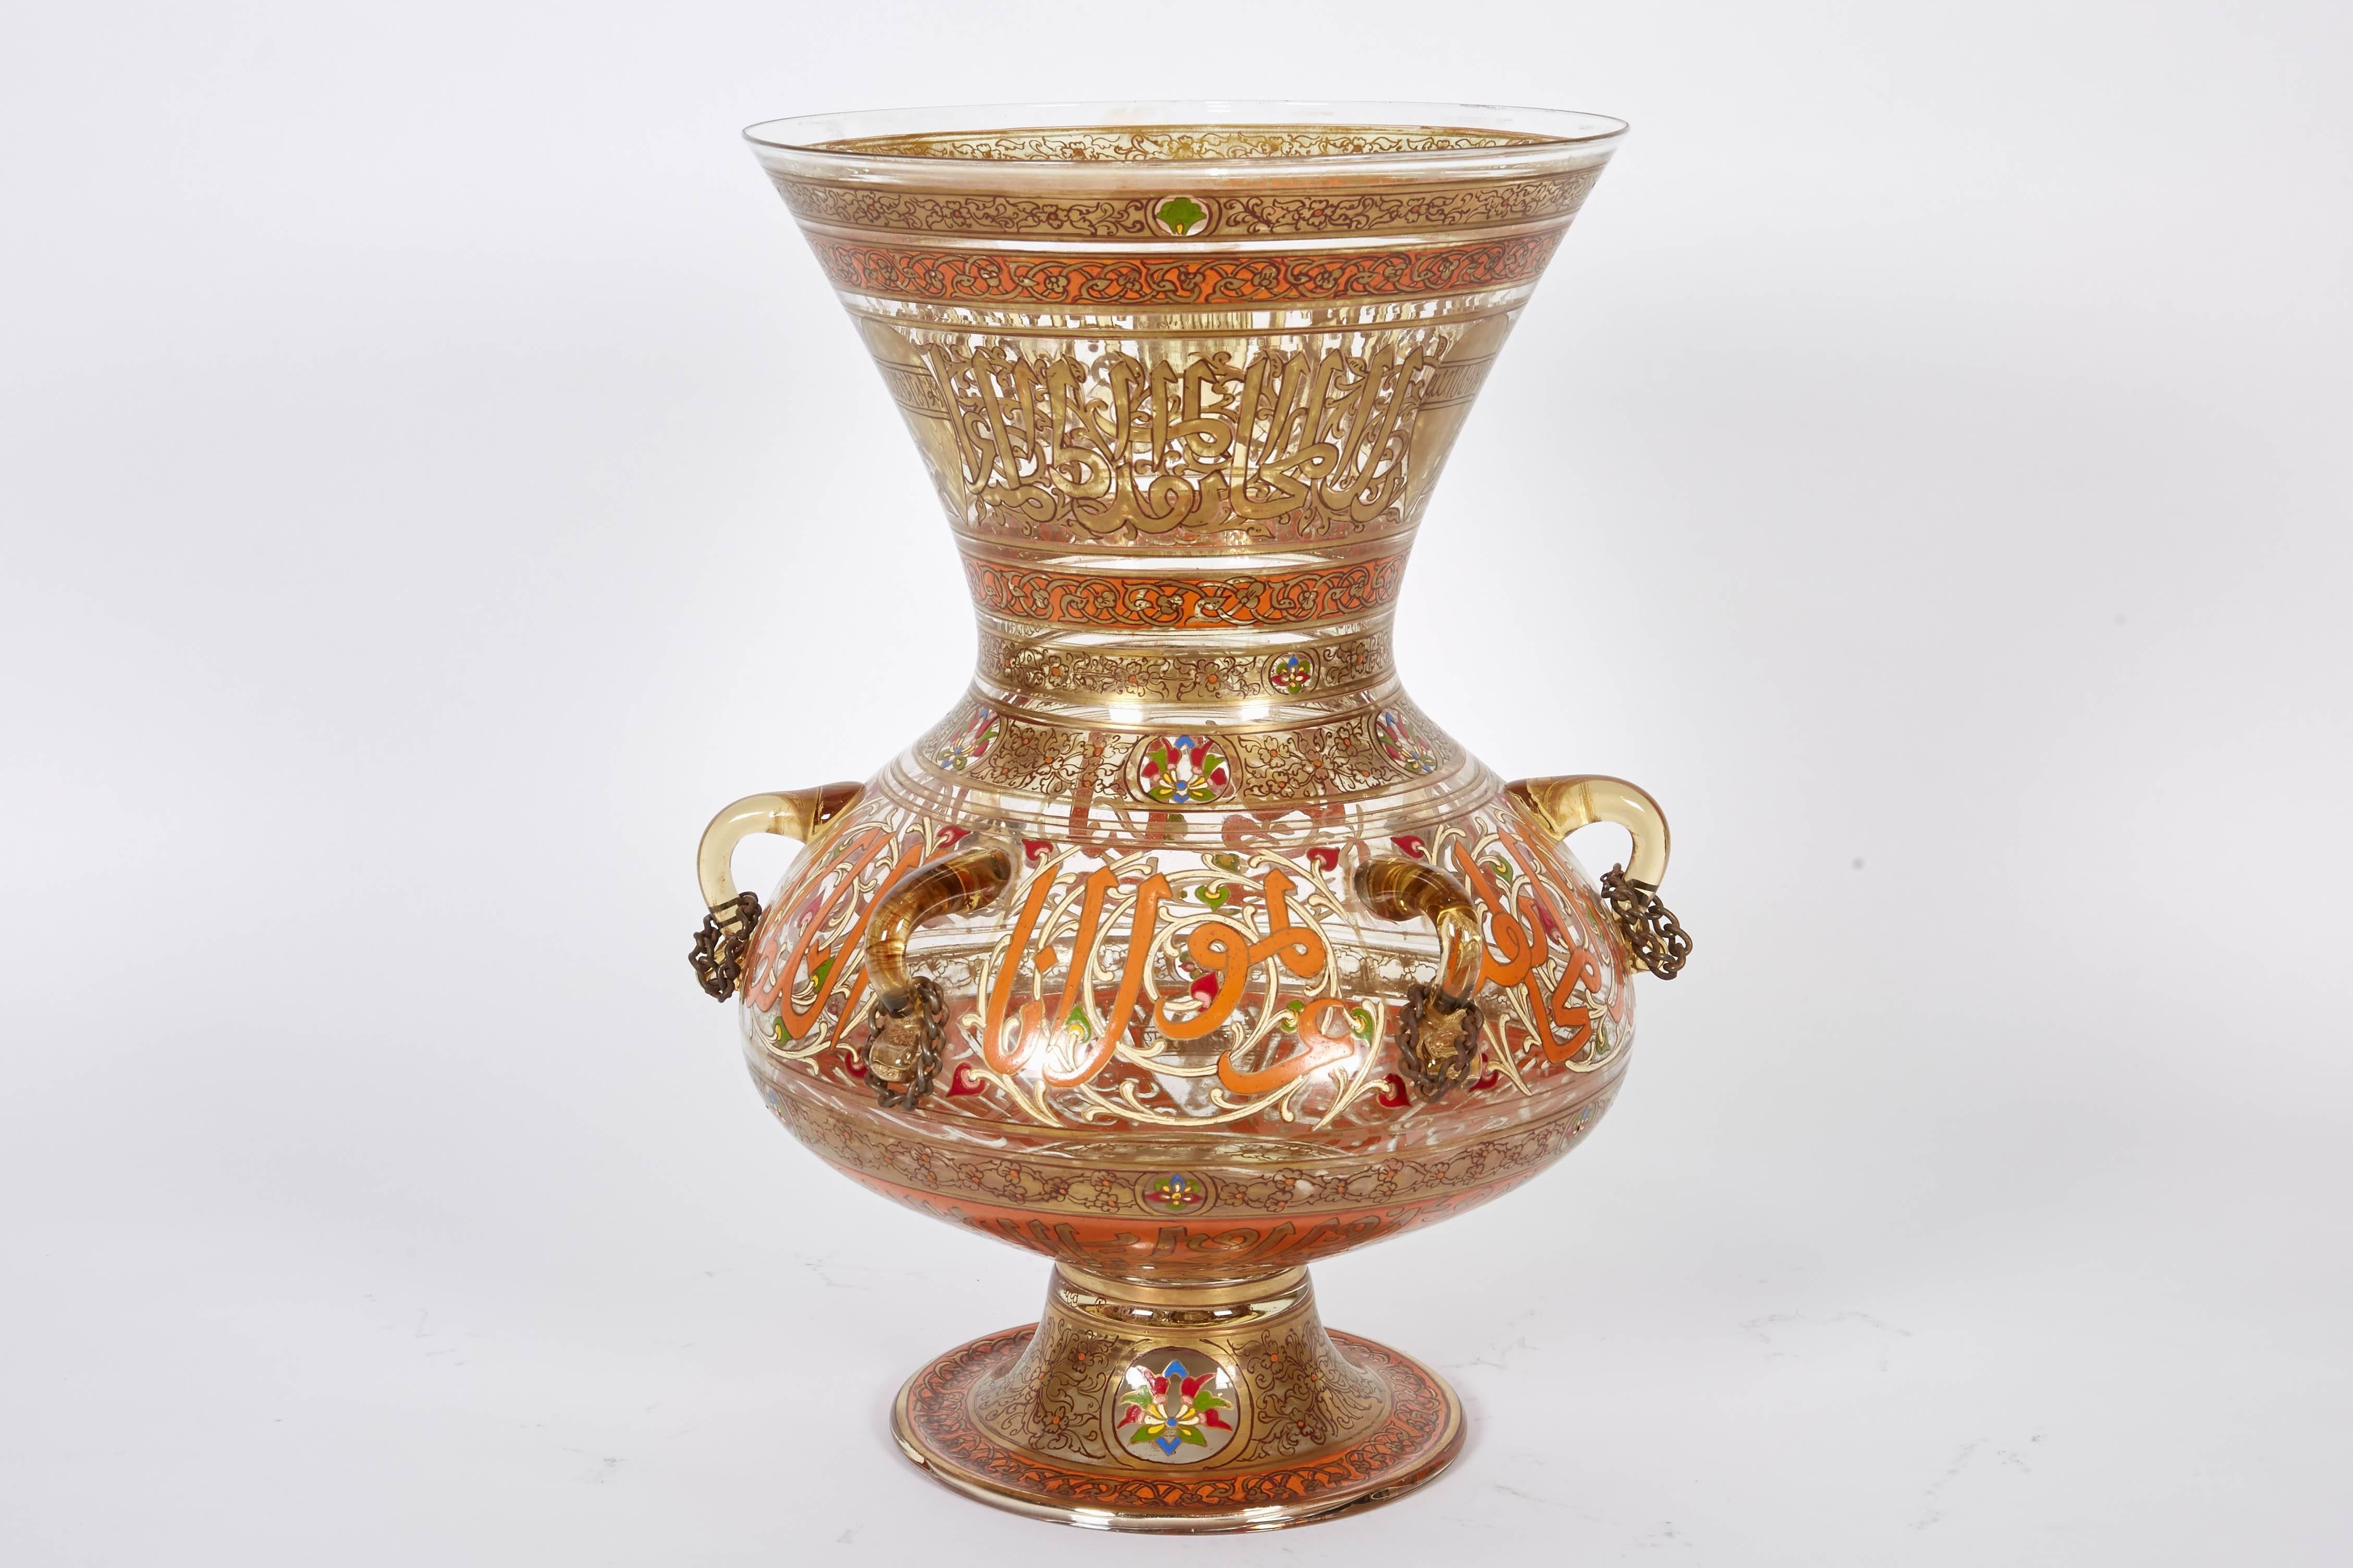 Rare French Enameled Mamluk Revival Glass Mosque Lamp by Philippe Joseph Brocard For Sale 7